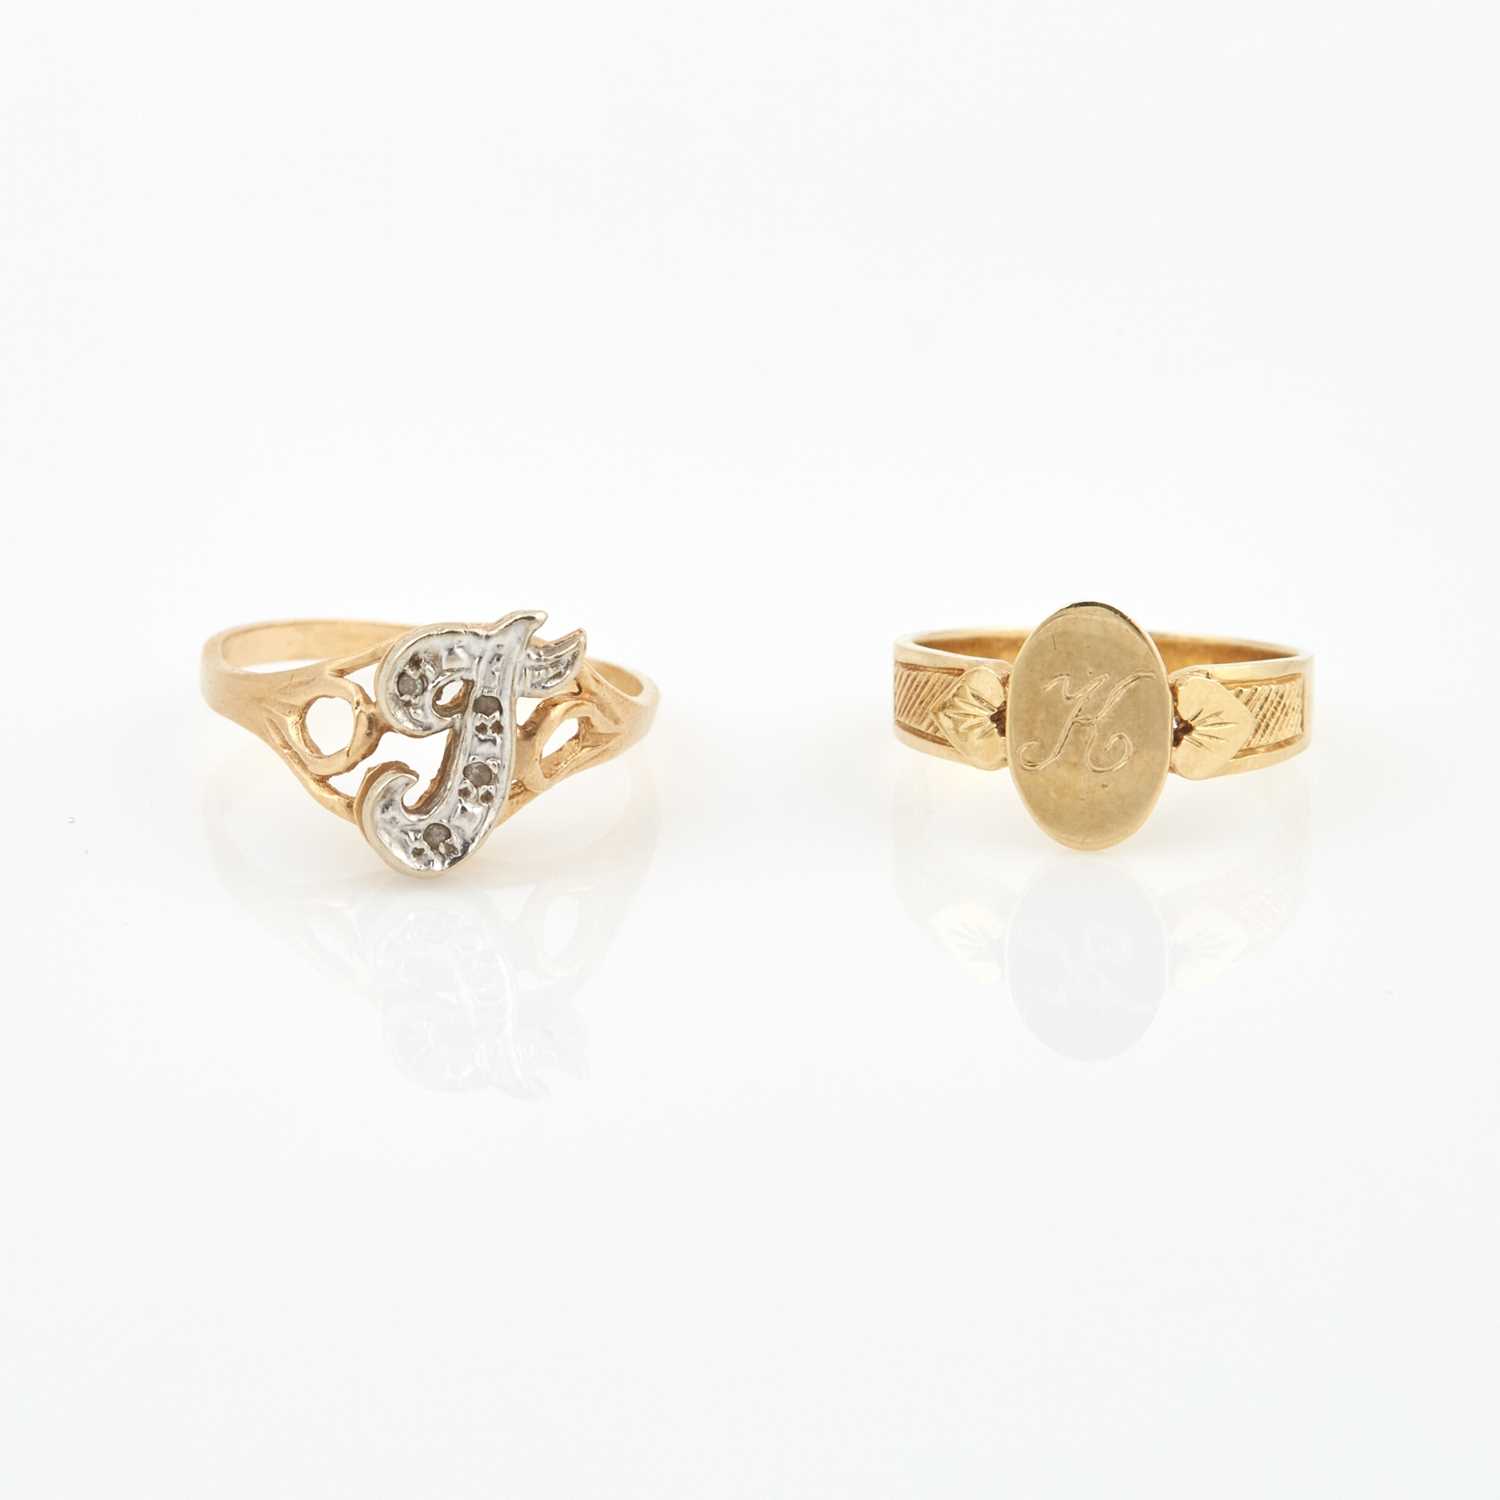 Lot 218 - Diamond Initial Ring and Gold Initial Ring, 14K 2 dwt.